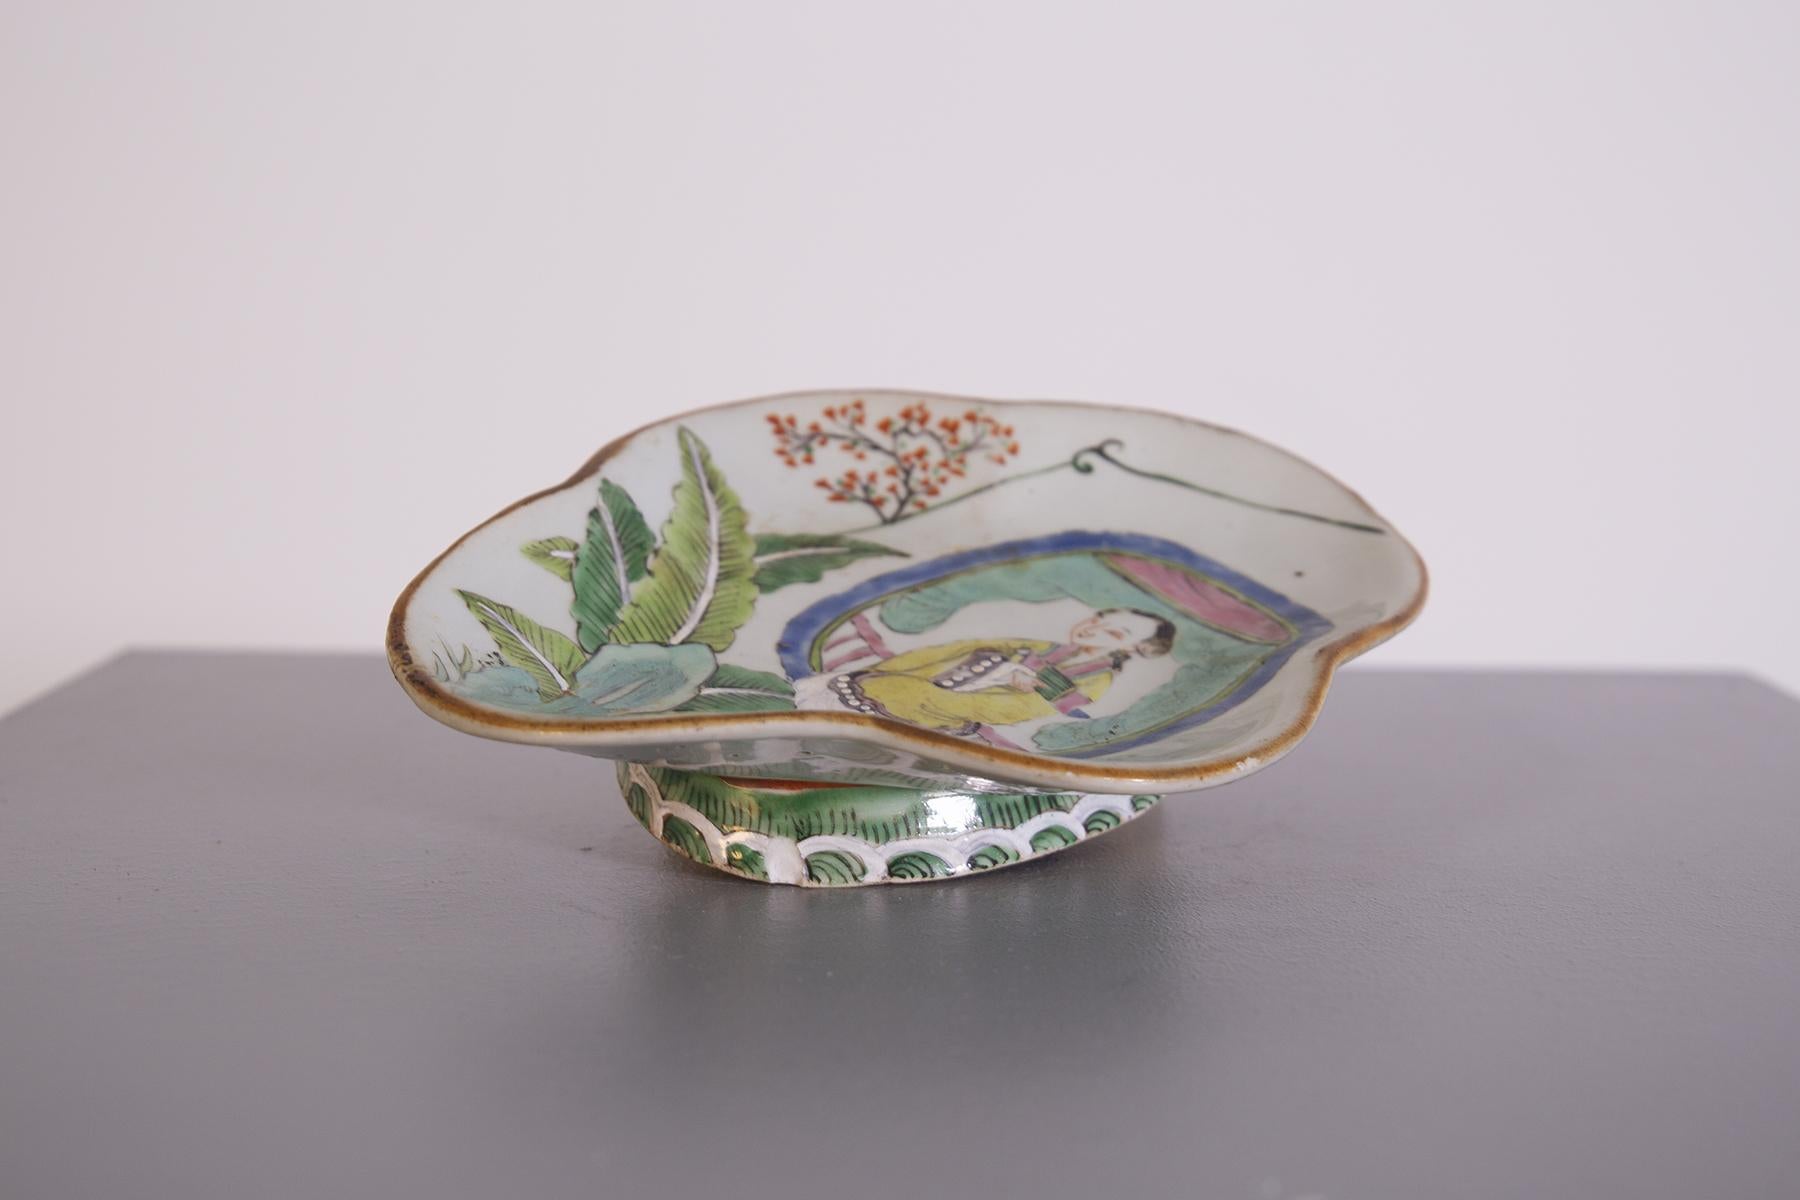 Beautiful vintage Chinese ceramic tray dating from the early 1900s, also useful as a pocket emptier or centerpiece.
The vintage Chinese tray is entirely hand-painted and depicts a woman kneeling happily looking at flourishing nature. Also painted